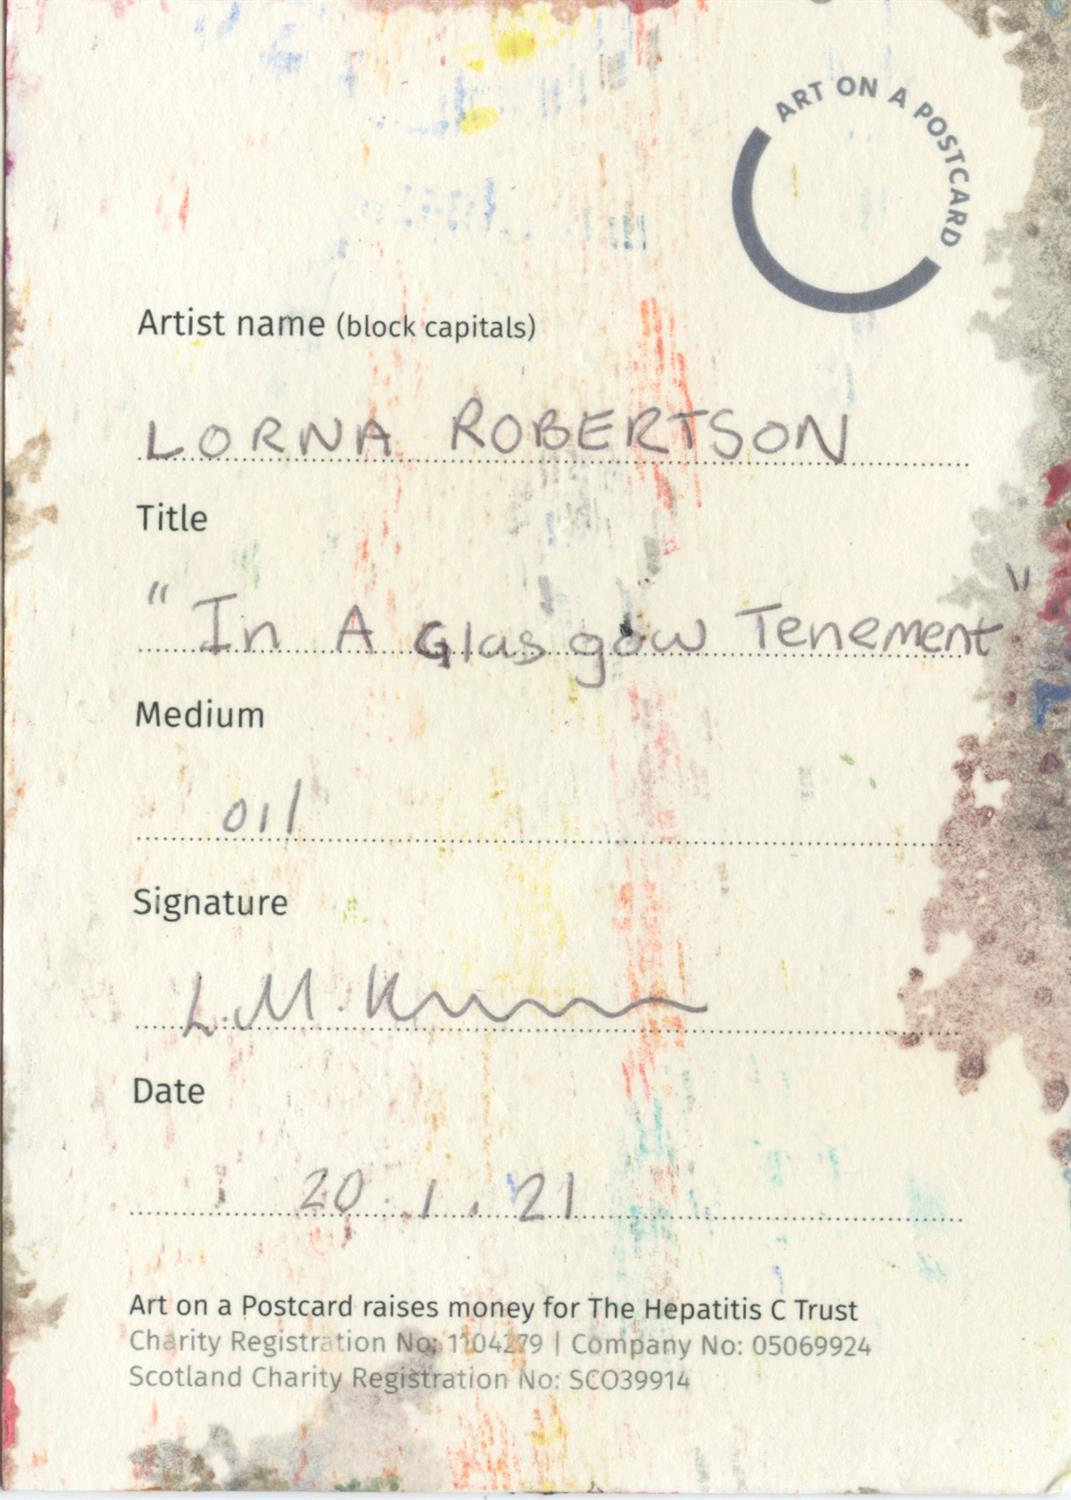 Lorna Robertson, In A Glasgow Tenement, 2021 - Image 2 of 3